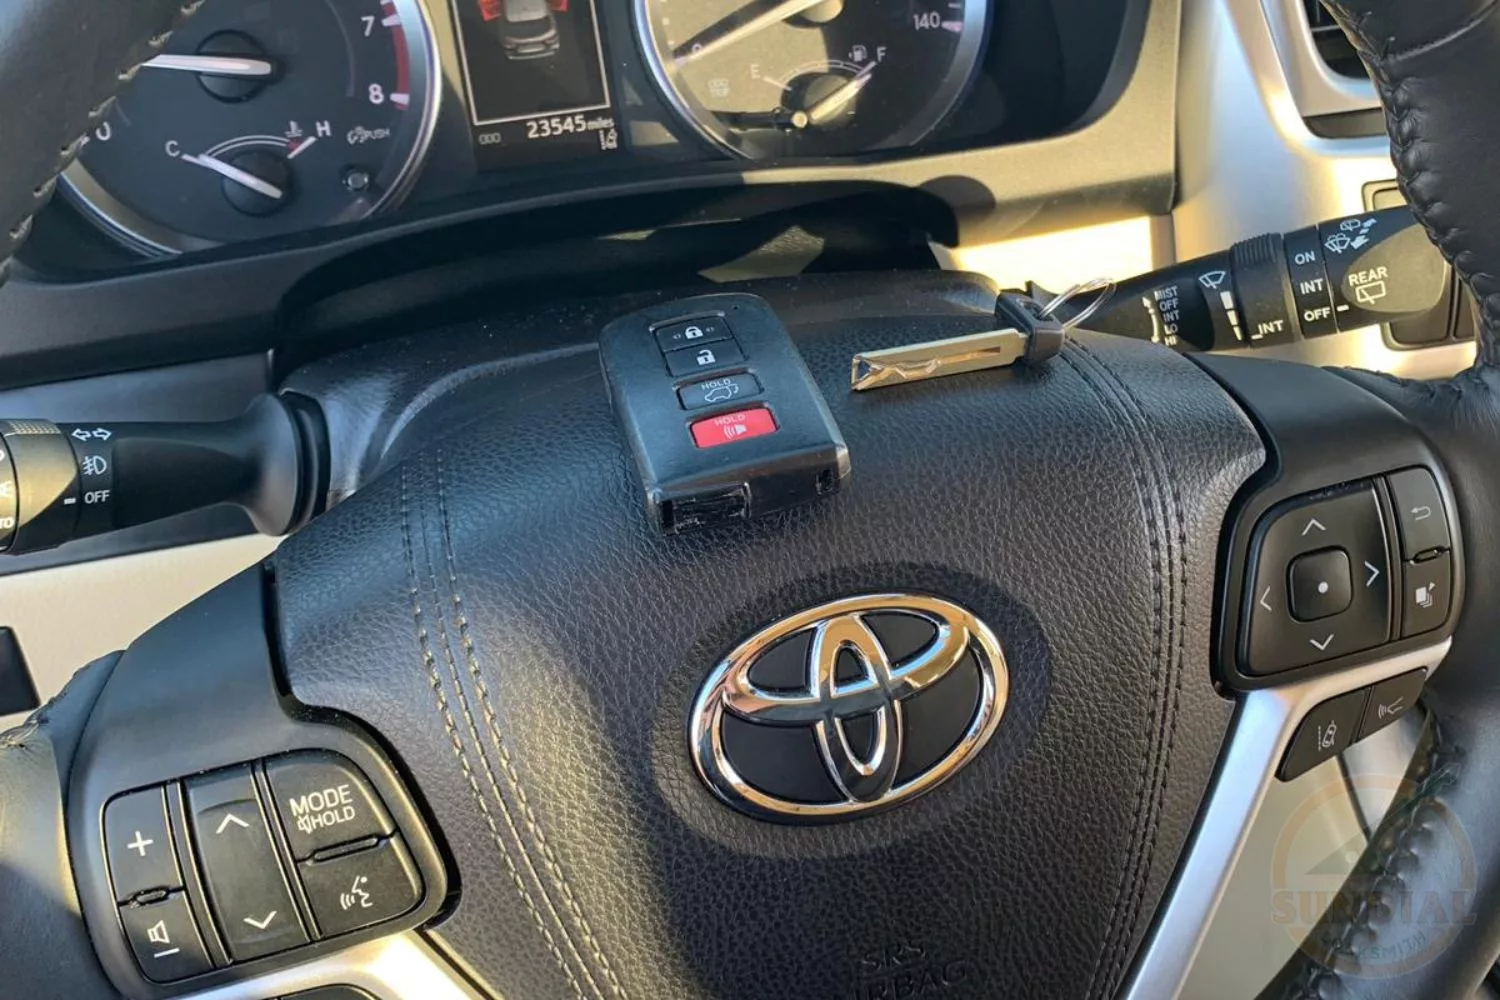 Driver's perspective of a Toyota steering wheel with multifunction controls and a visible key fob with a dashboard in the background.